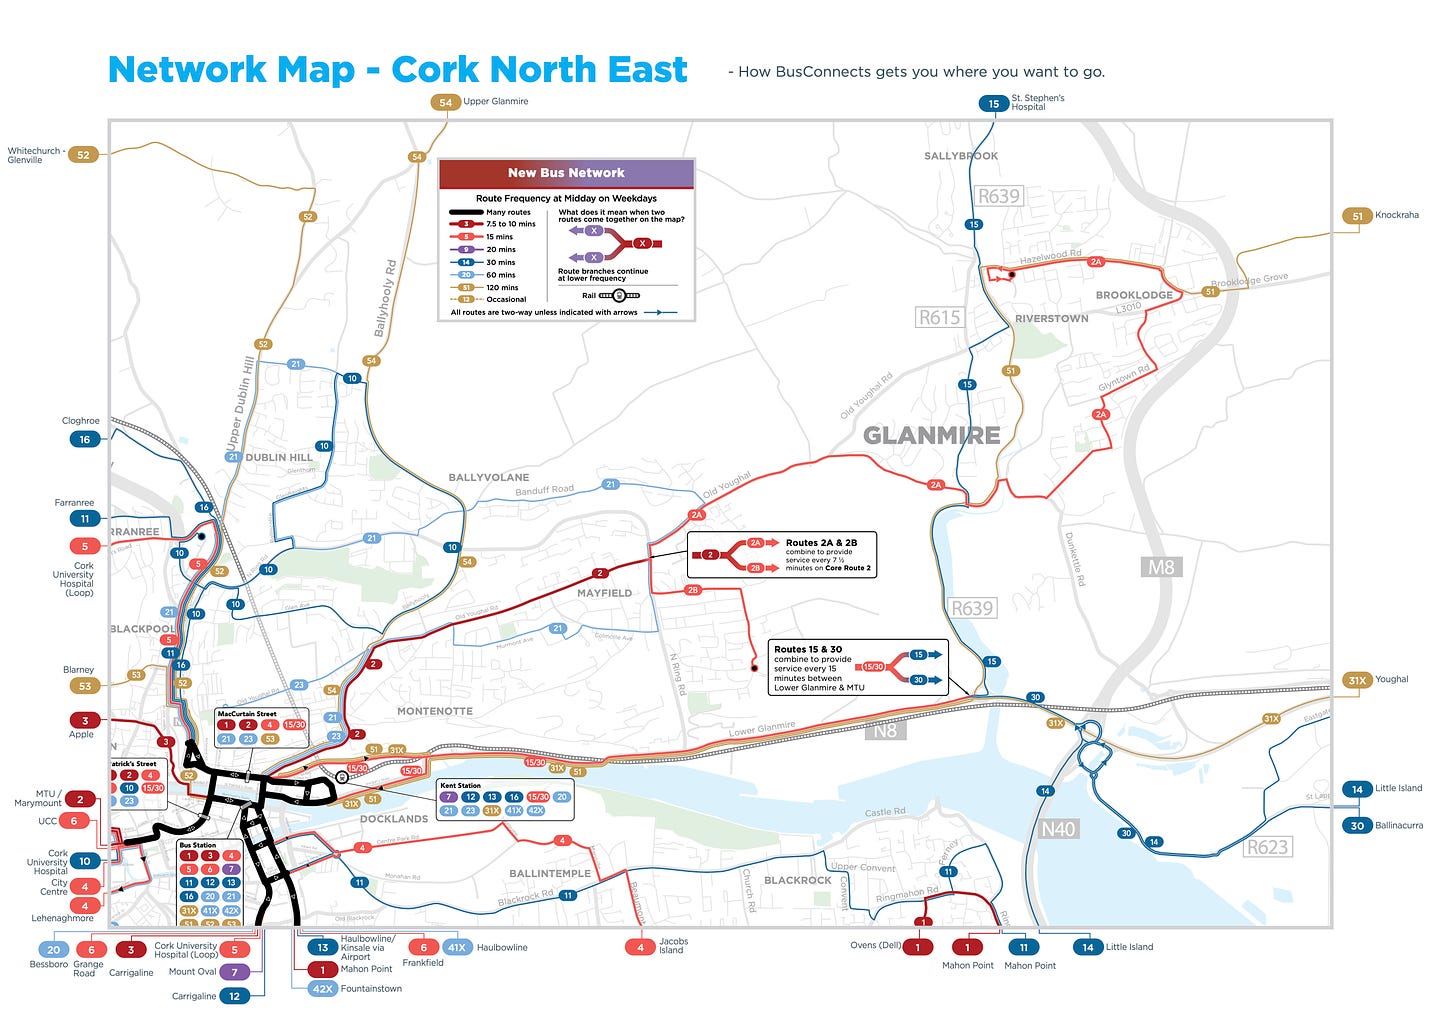 Network Map - Cork North East